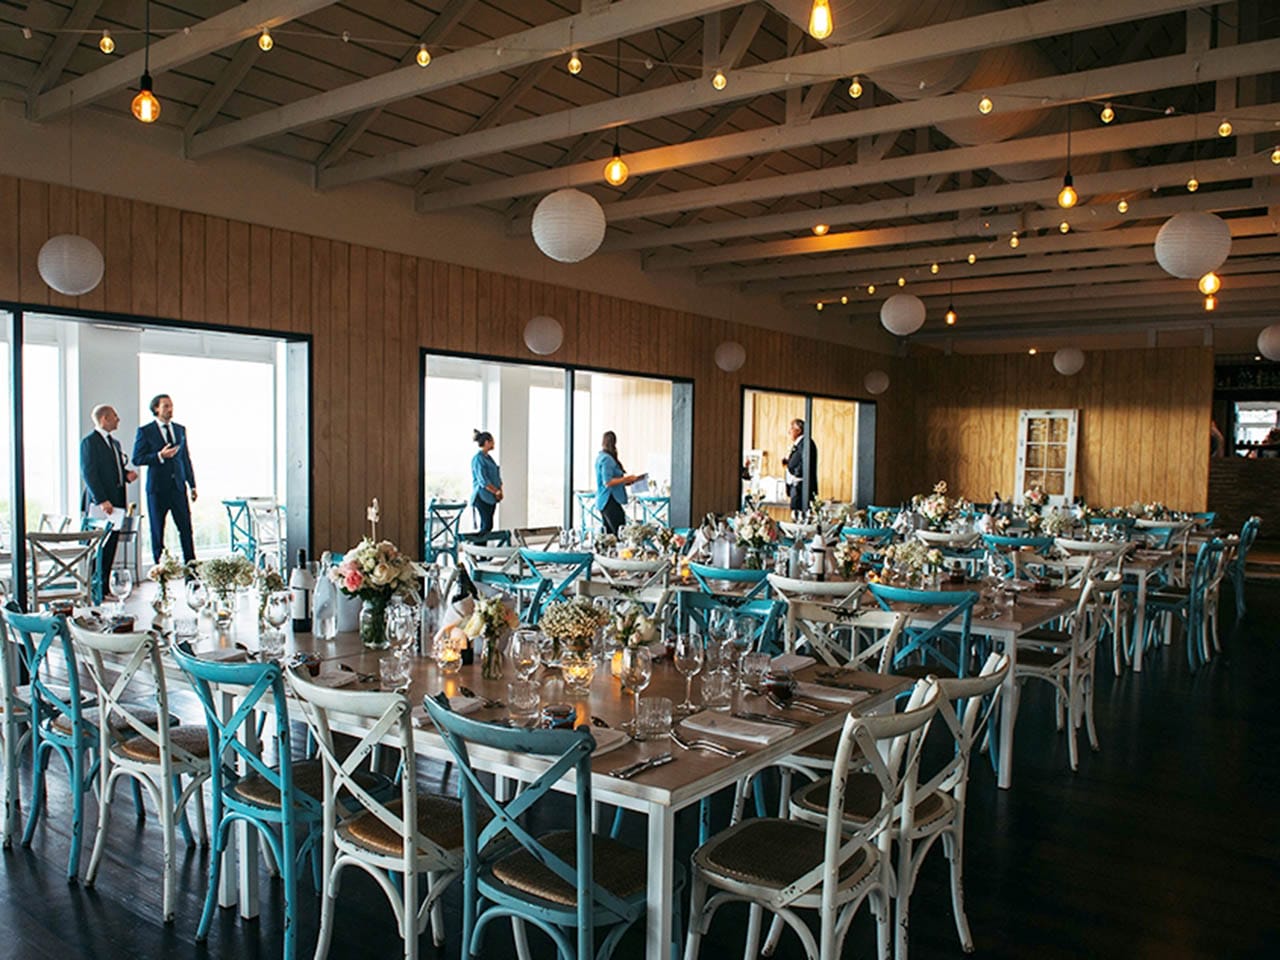 Tables Set Up For A Wedding With Lights And Lanterns at Coast Port Beach Oceanside Venue